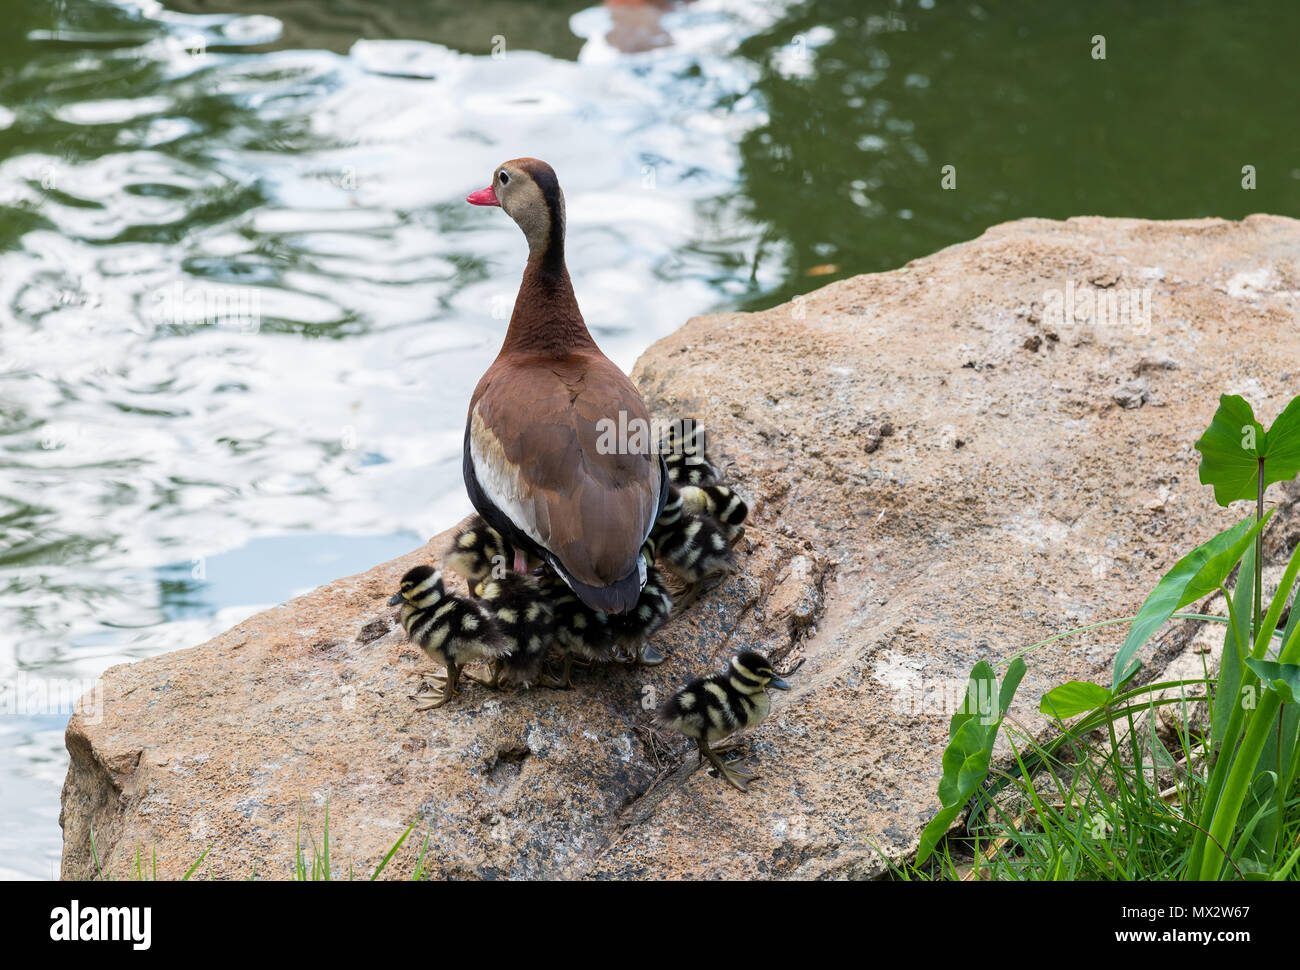 A Black-bellied Whistling Duck (Dendrocygna autumnalis) mom and ducklings by a pond. Houston, Texas, USA. Stock Photo